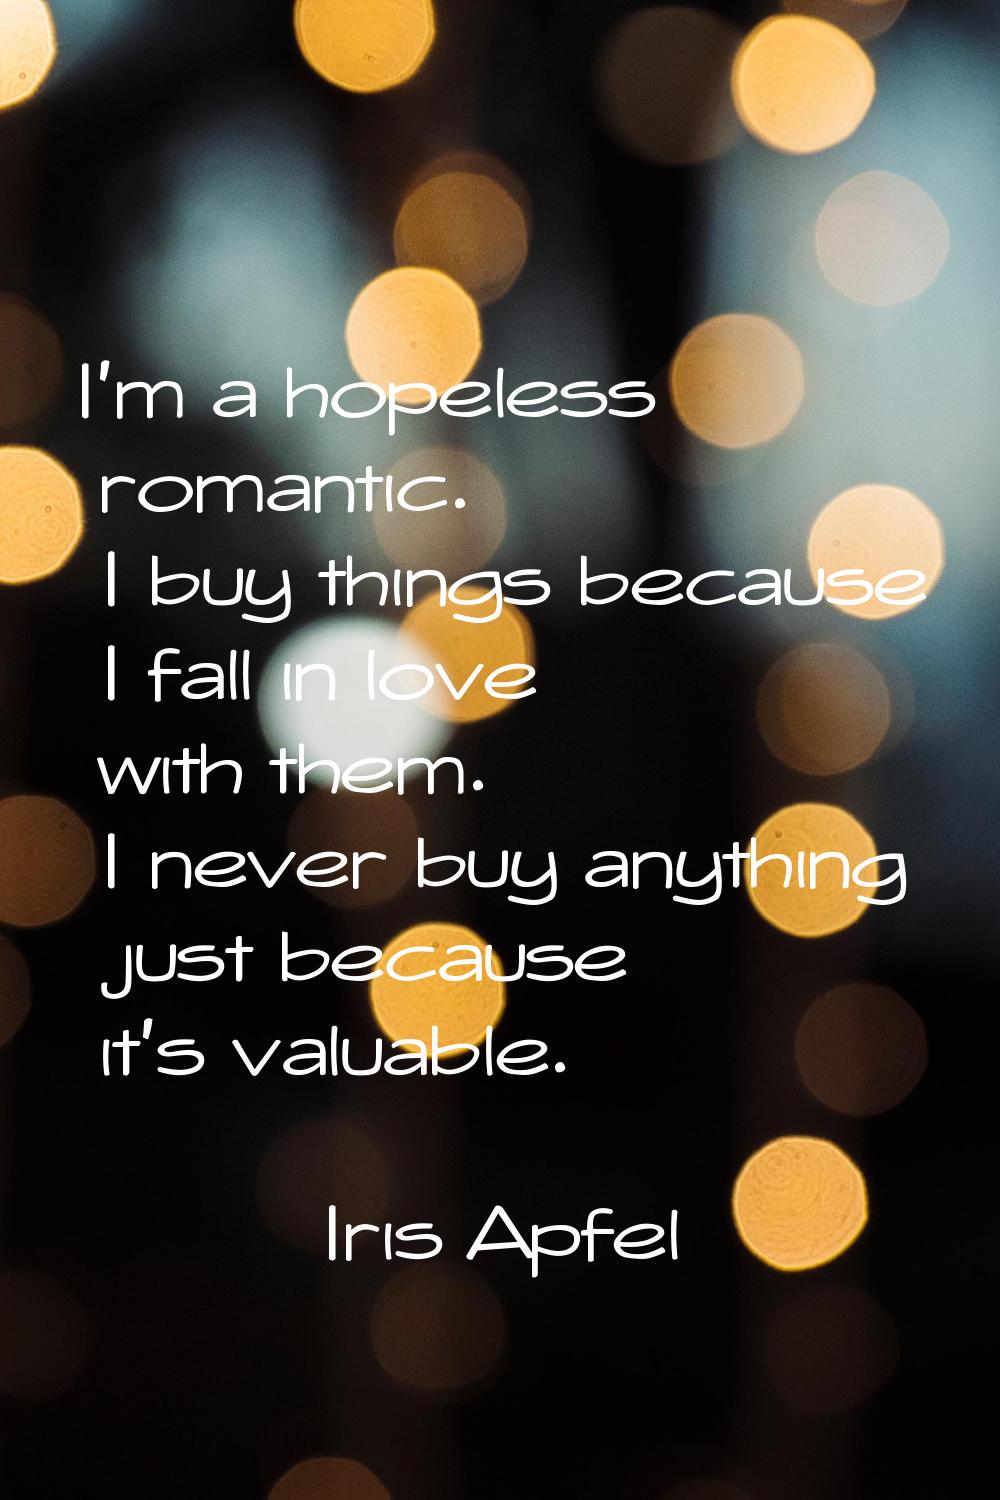 I'm a hopeless romantic. I buy things because I fall in love with them. I never buy anything just b